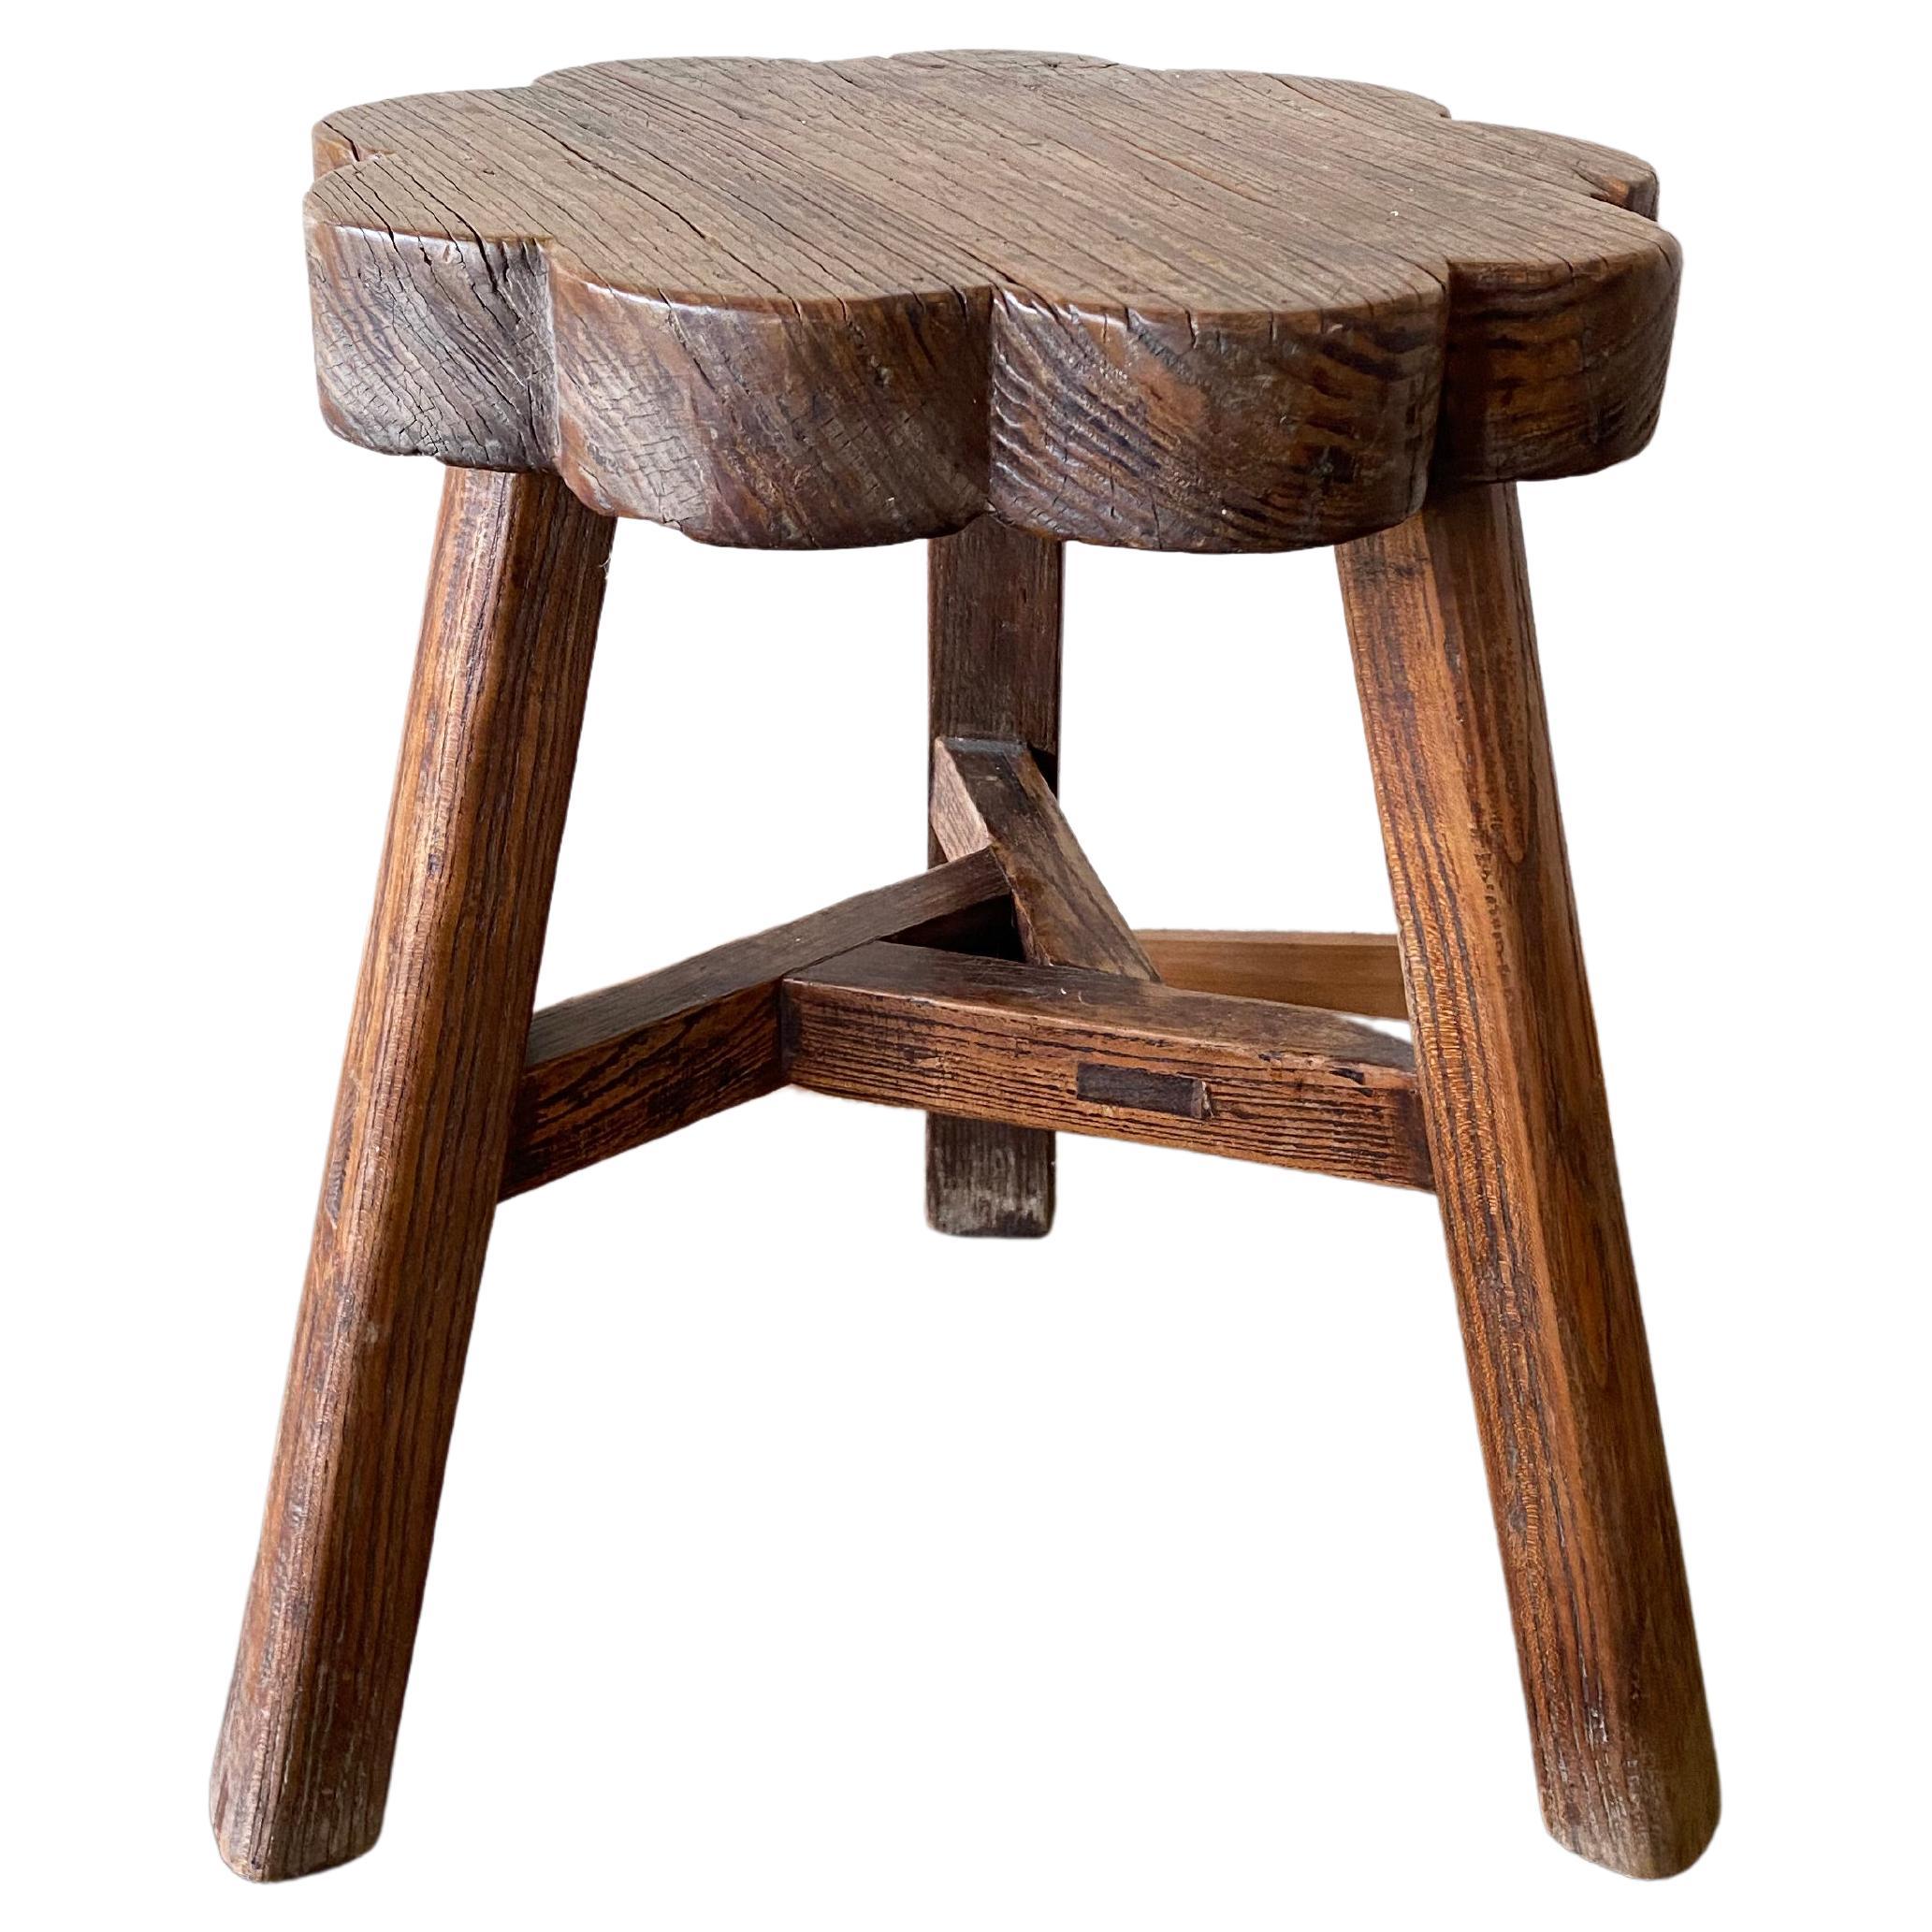 Antique Chinese Elm Wood Stool with Floral Wood Detailing, Early 20th Century